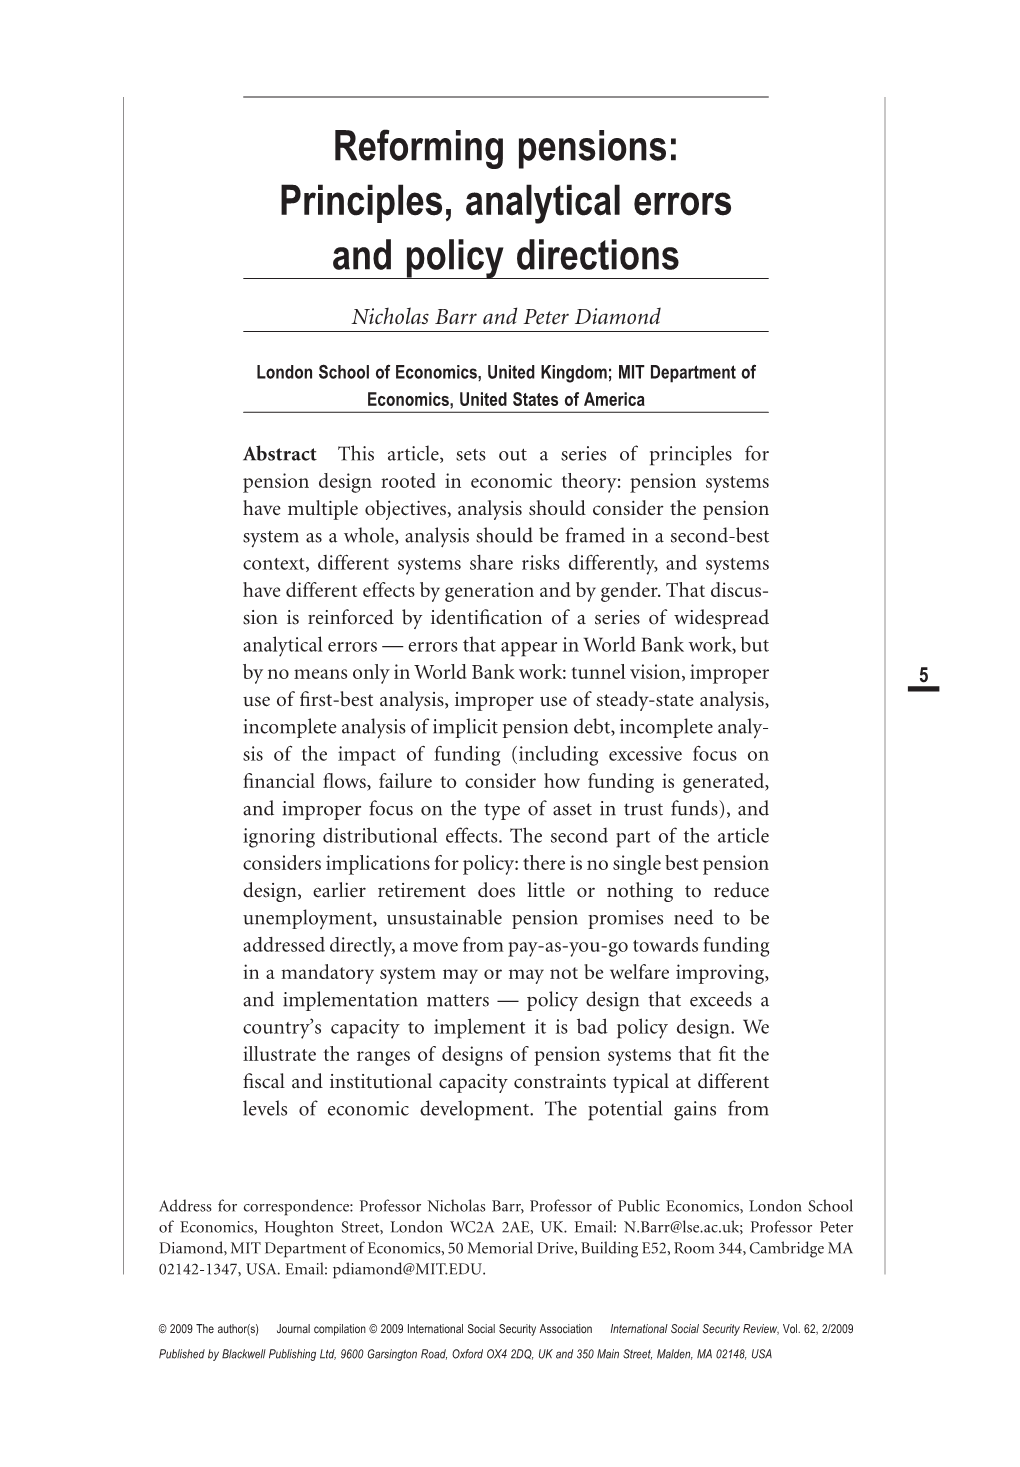 Reforming Pensions: Principles, Analytical Errors and Policy Directions